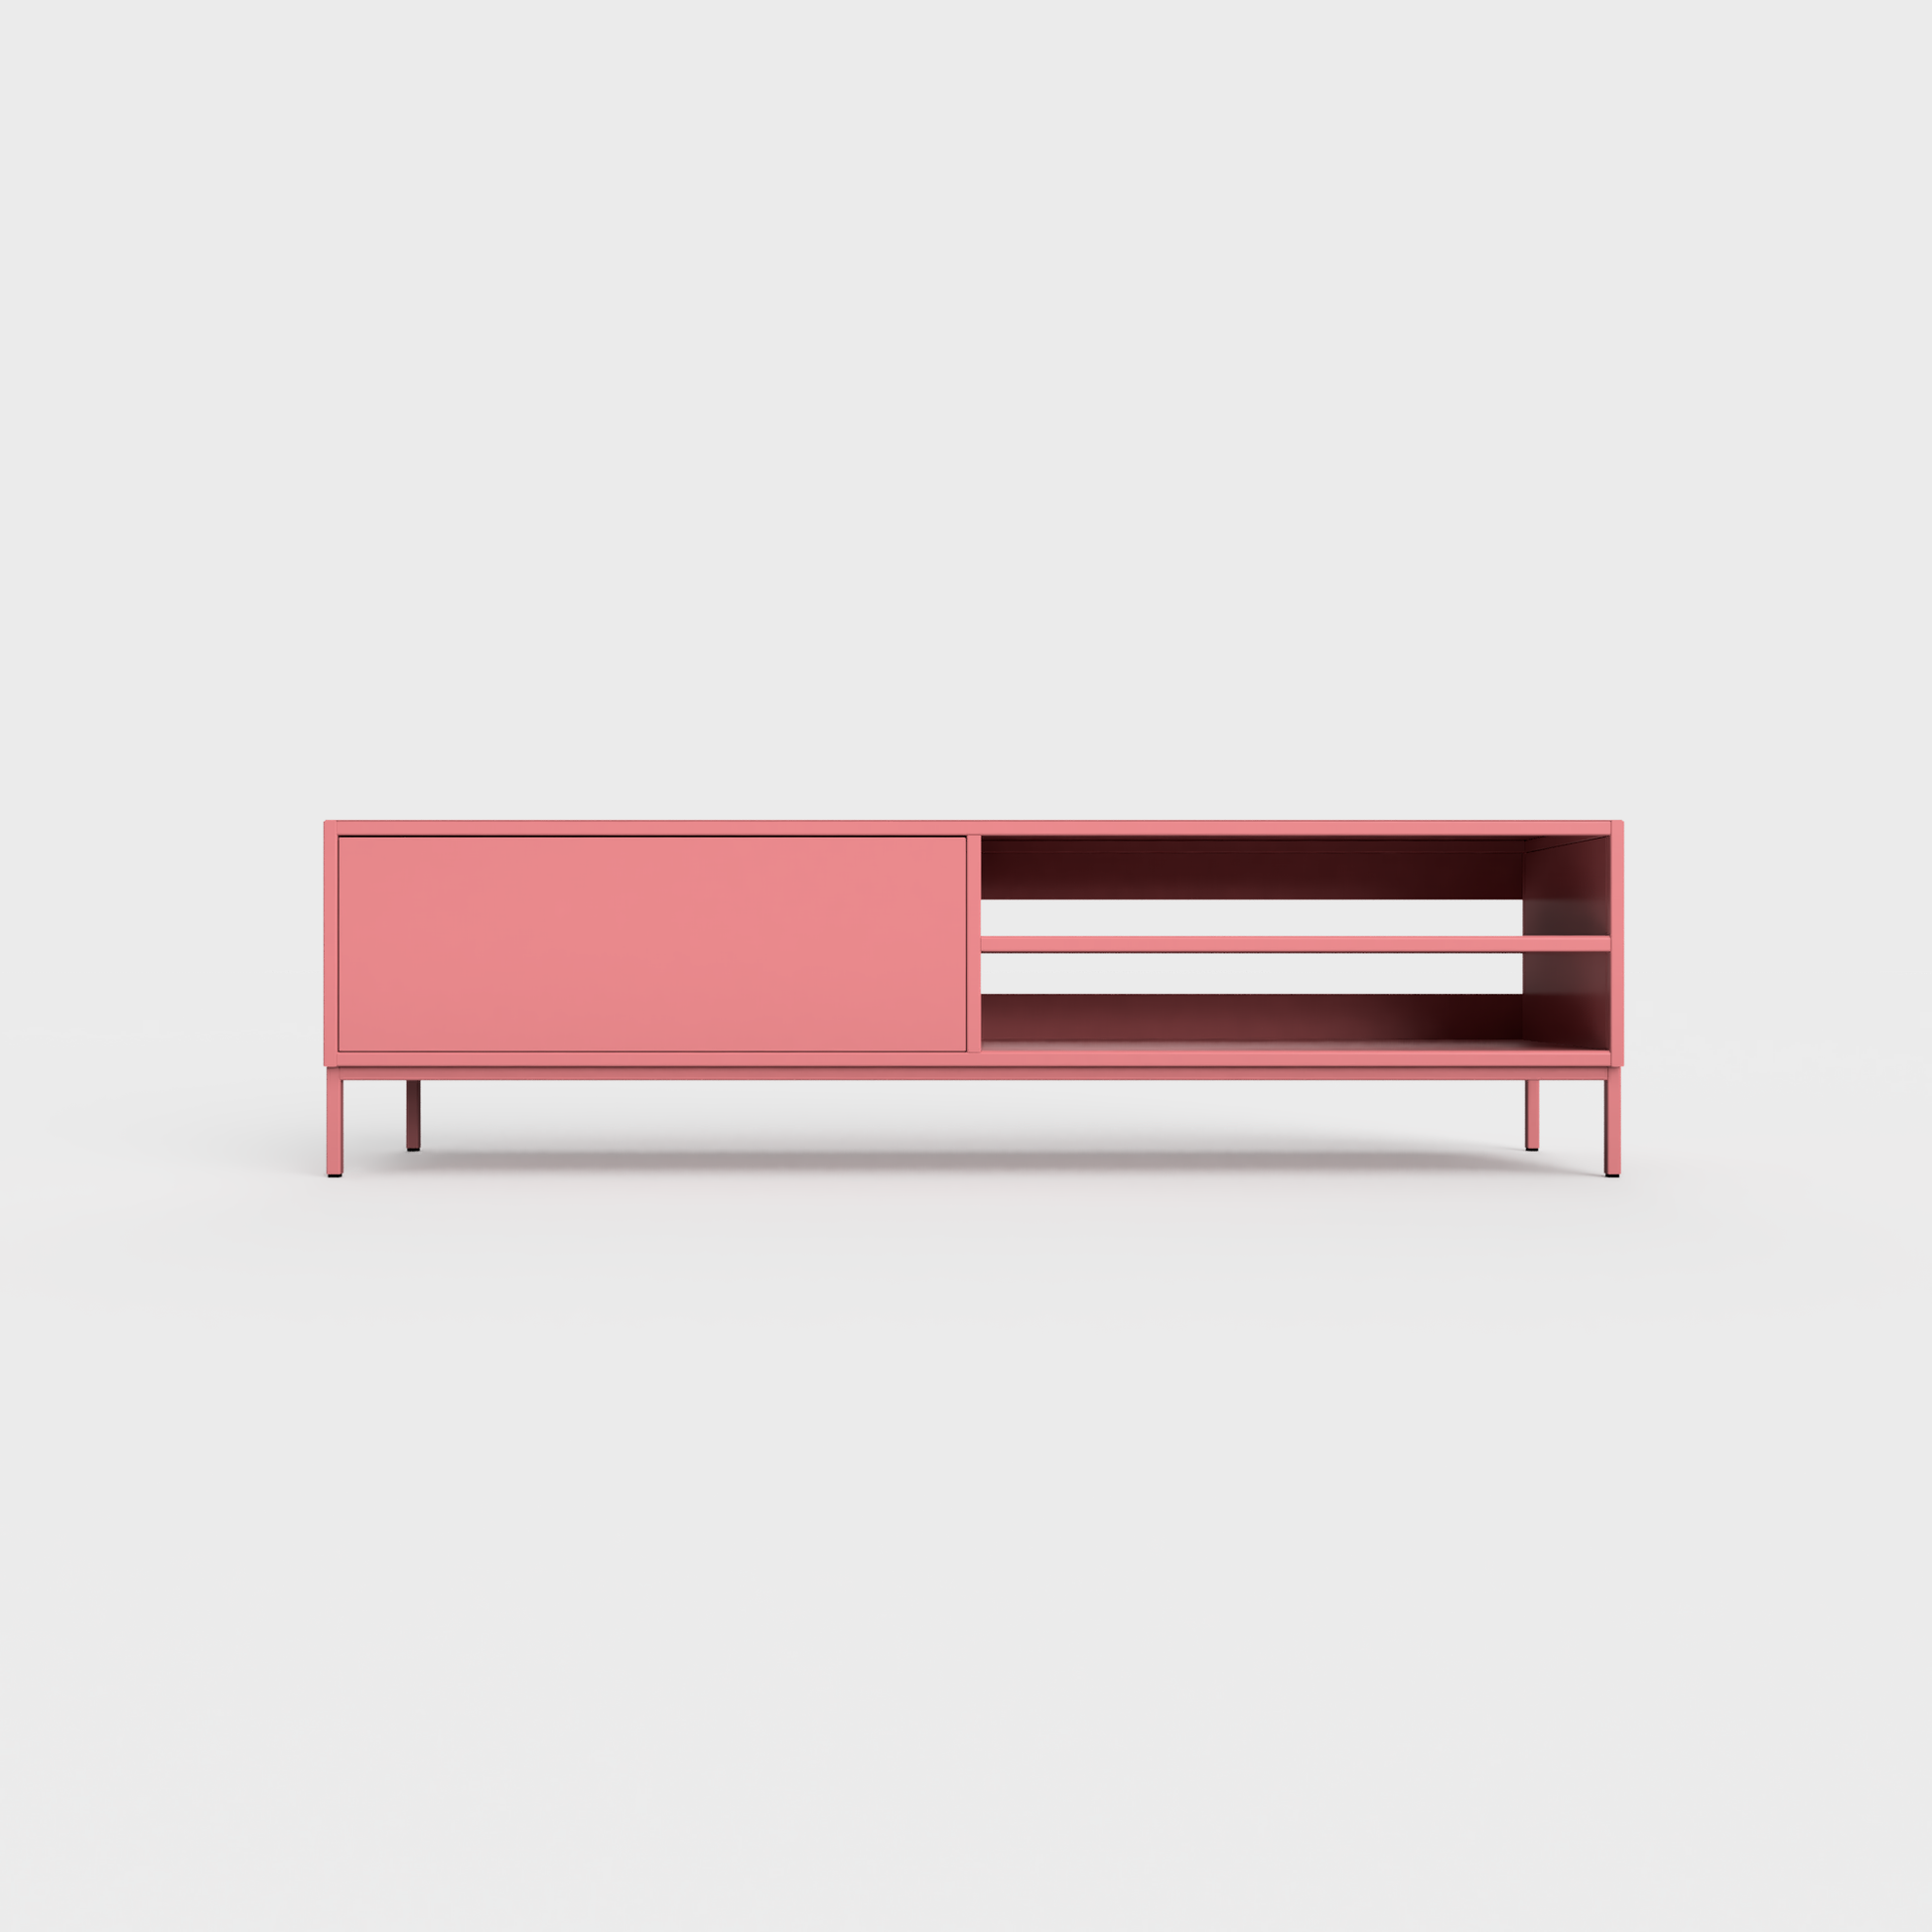 Prunus 02 Lowboard in Rose color, powder-coated steel, elegant and modern piece of furniture for your living room